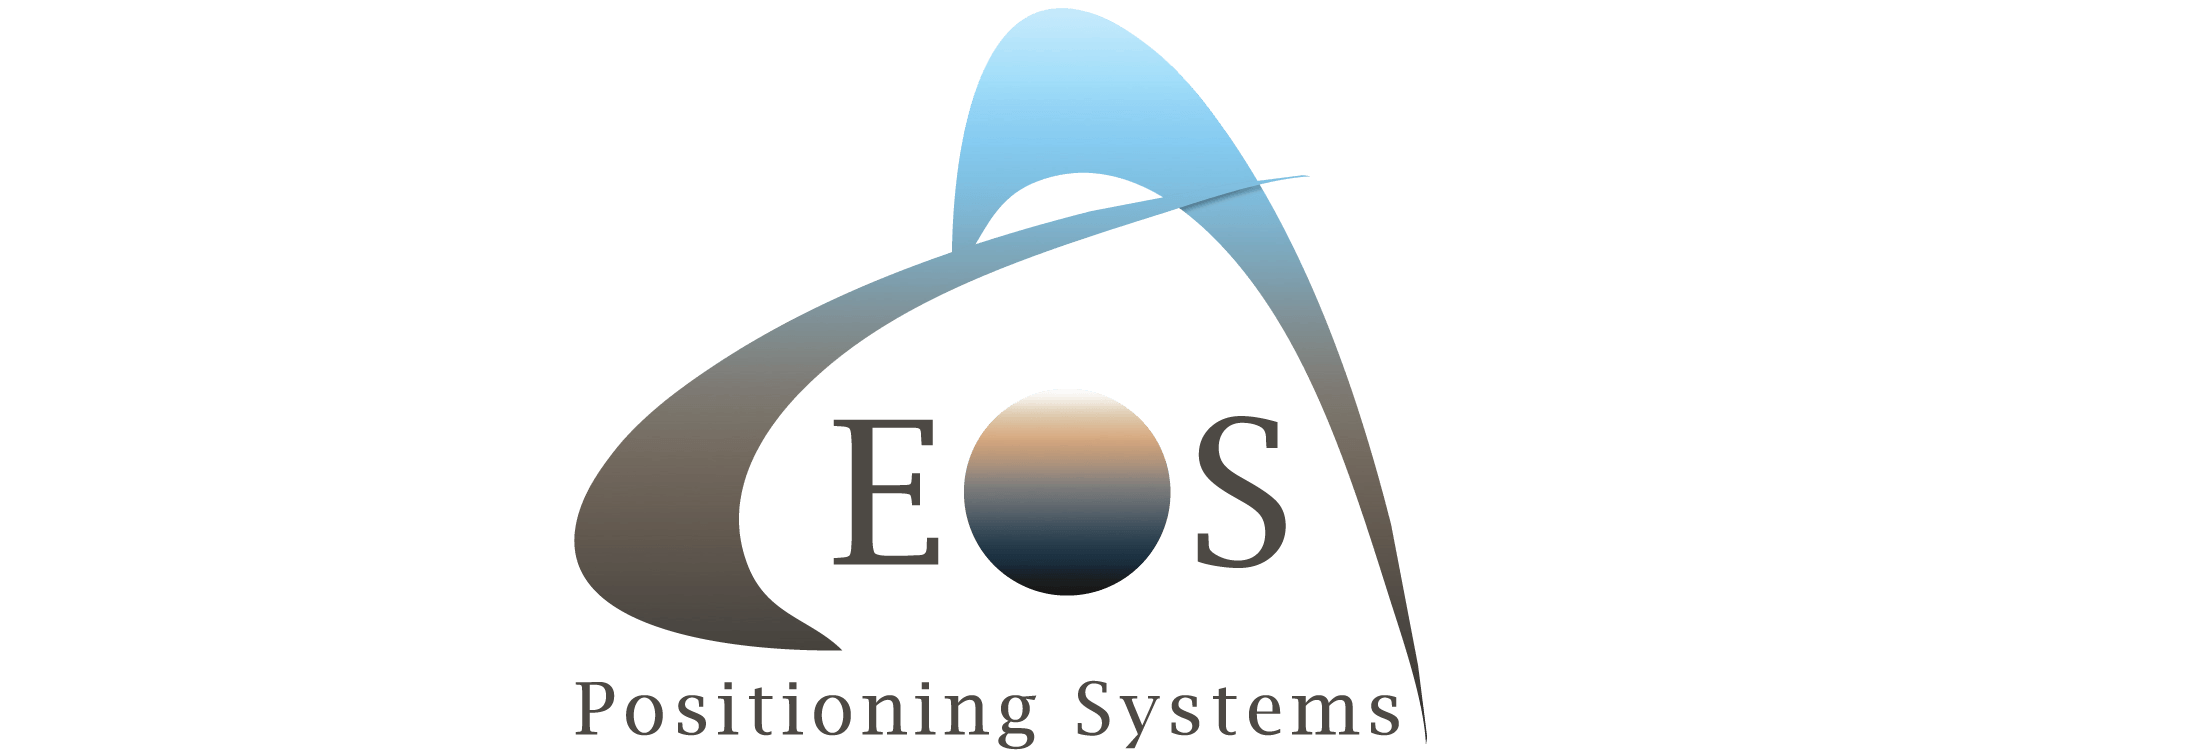 Eos Positioning partner - Augmented Reality for Esri GIS 